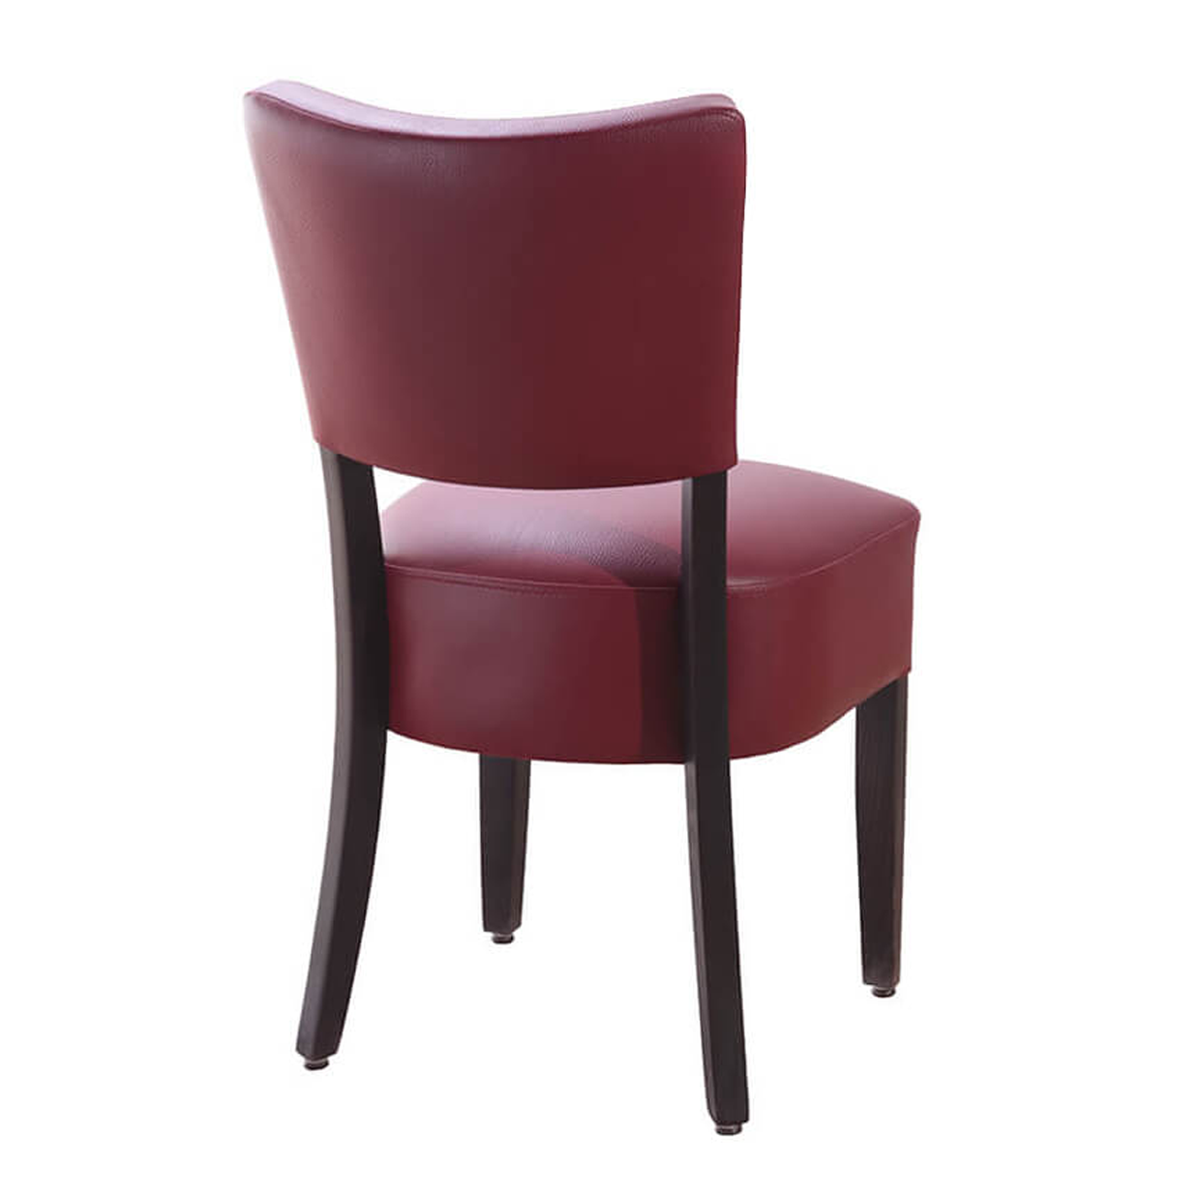 Dining chair 50×50 cm - MADE72